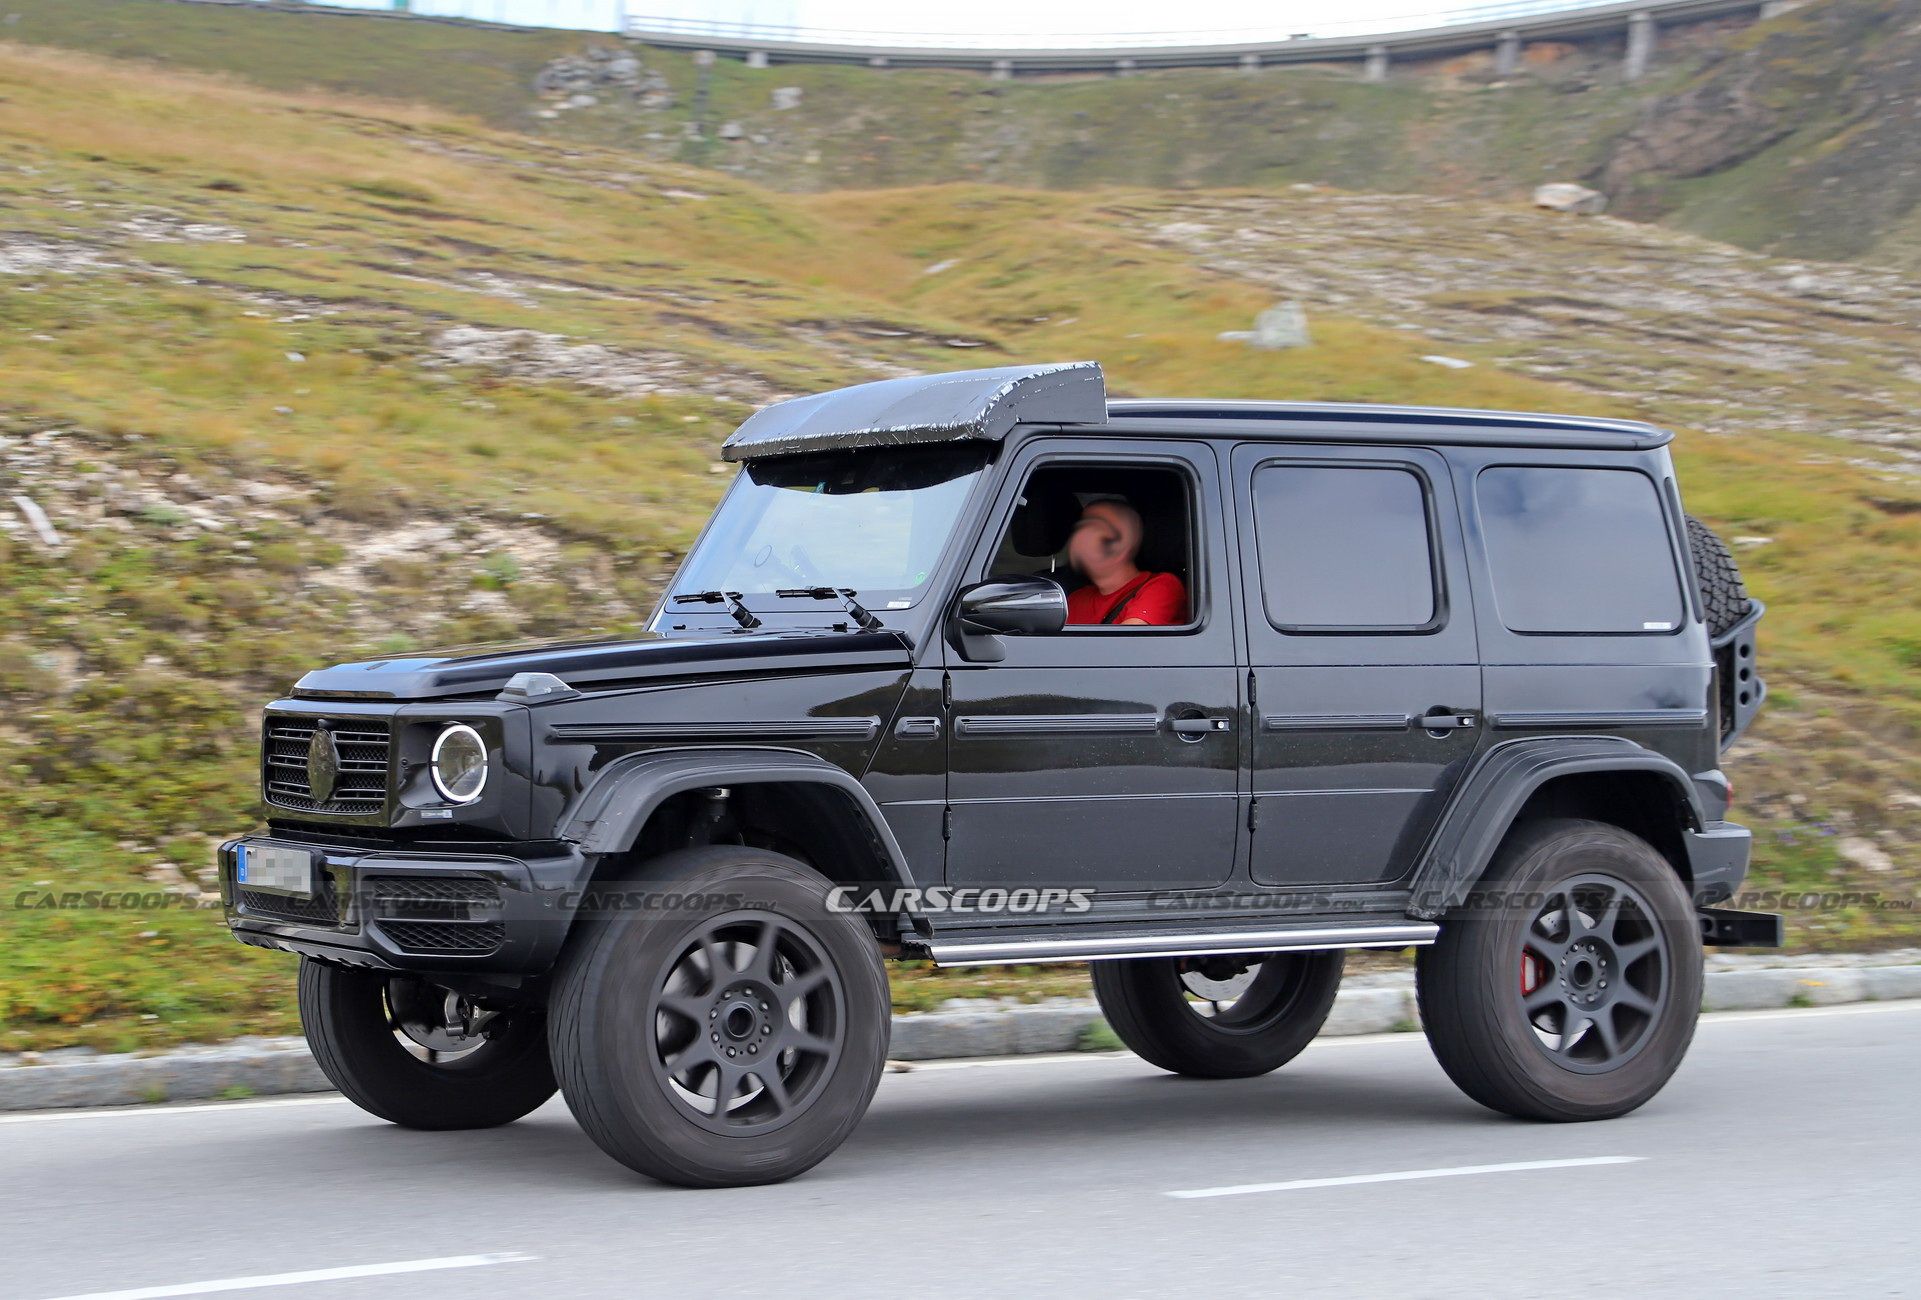 Mercedes AMG G Class 4x4² Spied Undisguised, Looks Every Bit As Wild As The Original